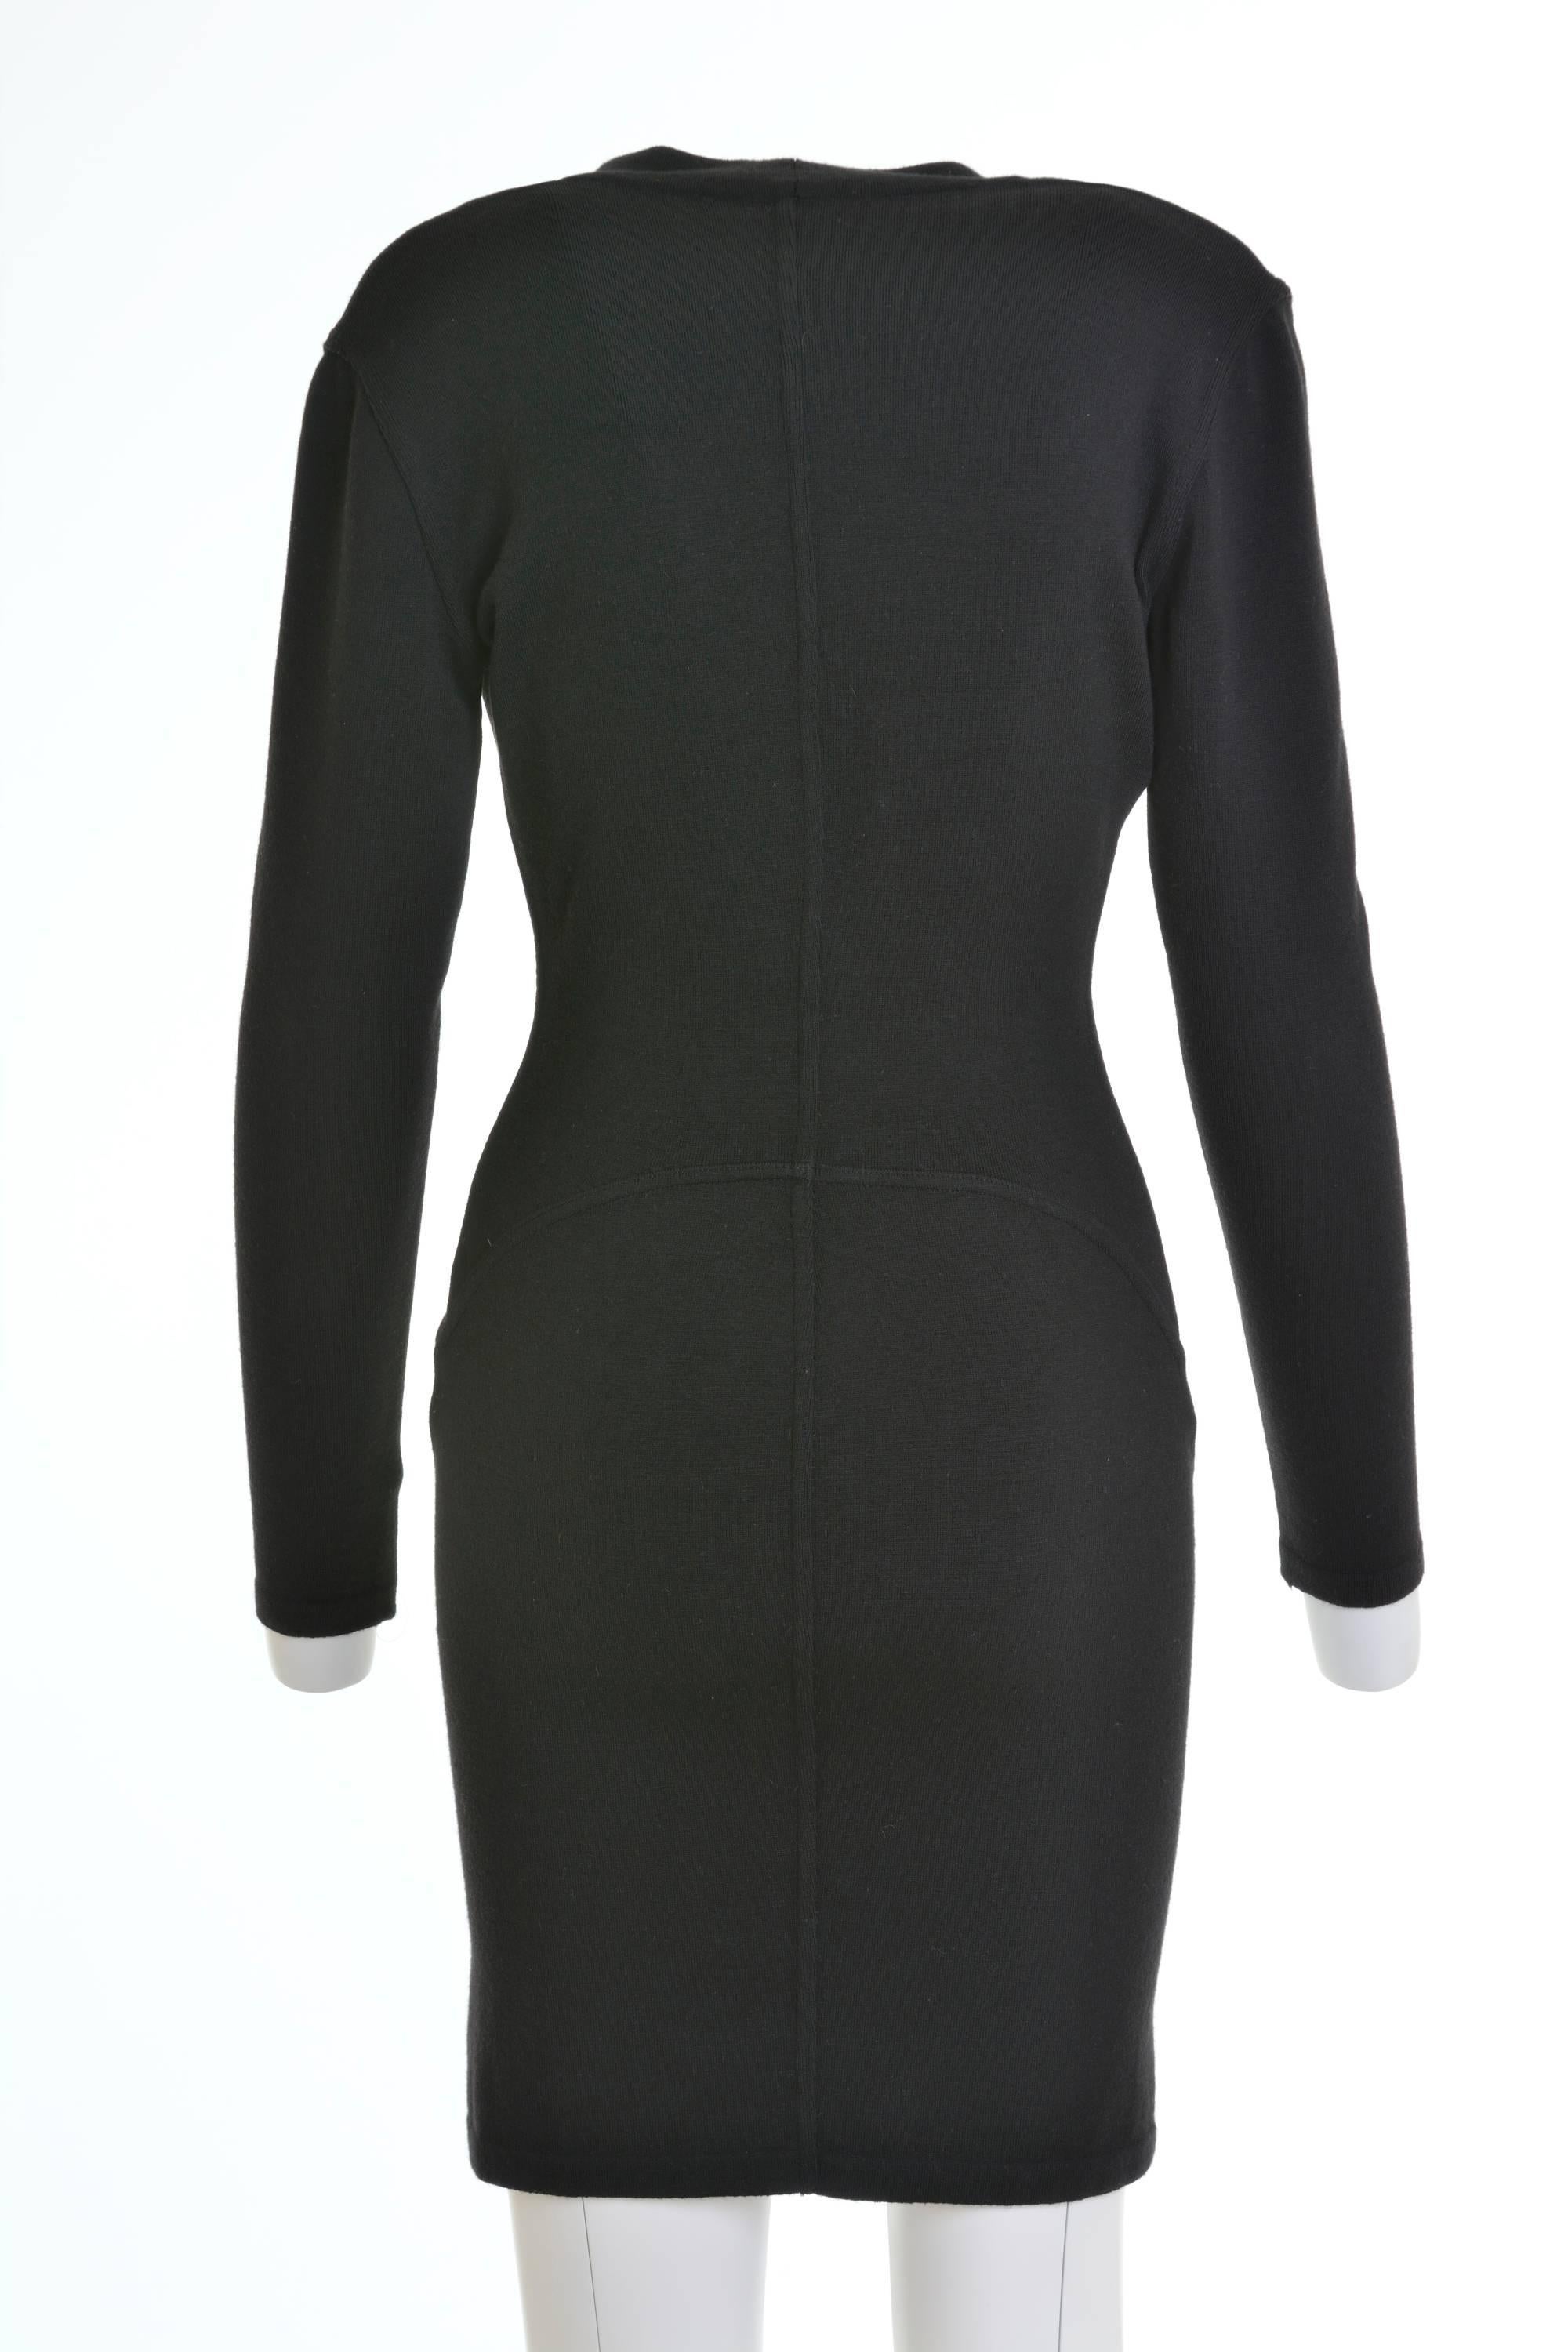 1990s Azzedine Alaïa mini dress in a black wool stretch fabric, with typical Alaïa's signature body. Long sleeves and pencil skirt, U-line neck.

Excellent vintage condition  

Label: Alaïa-Paris (Made in Italy) 
Fabric: wool/polyamide/elastane